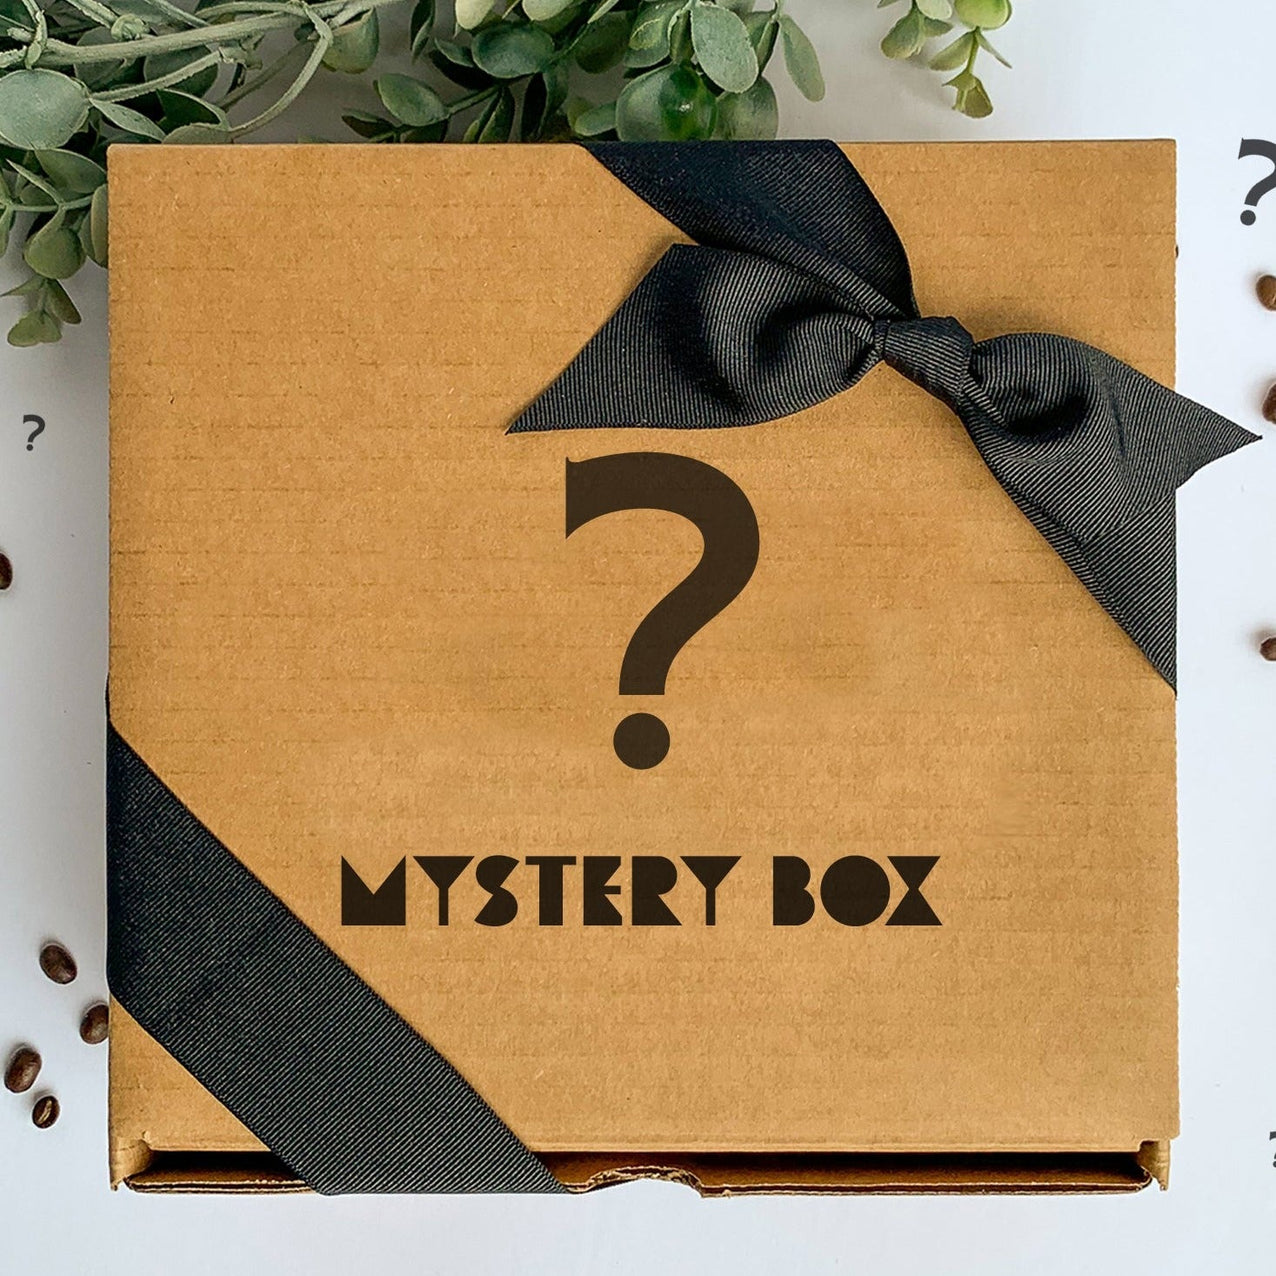 The Mystery Gift Shop Mystery Boxes Surprise Boxes Mystery Gifts